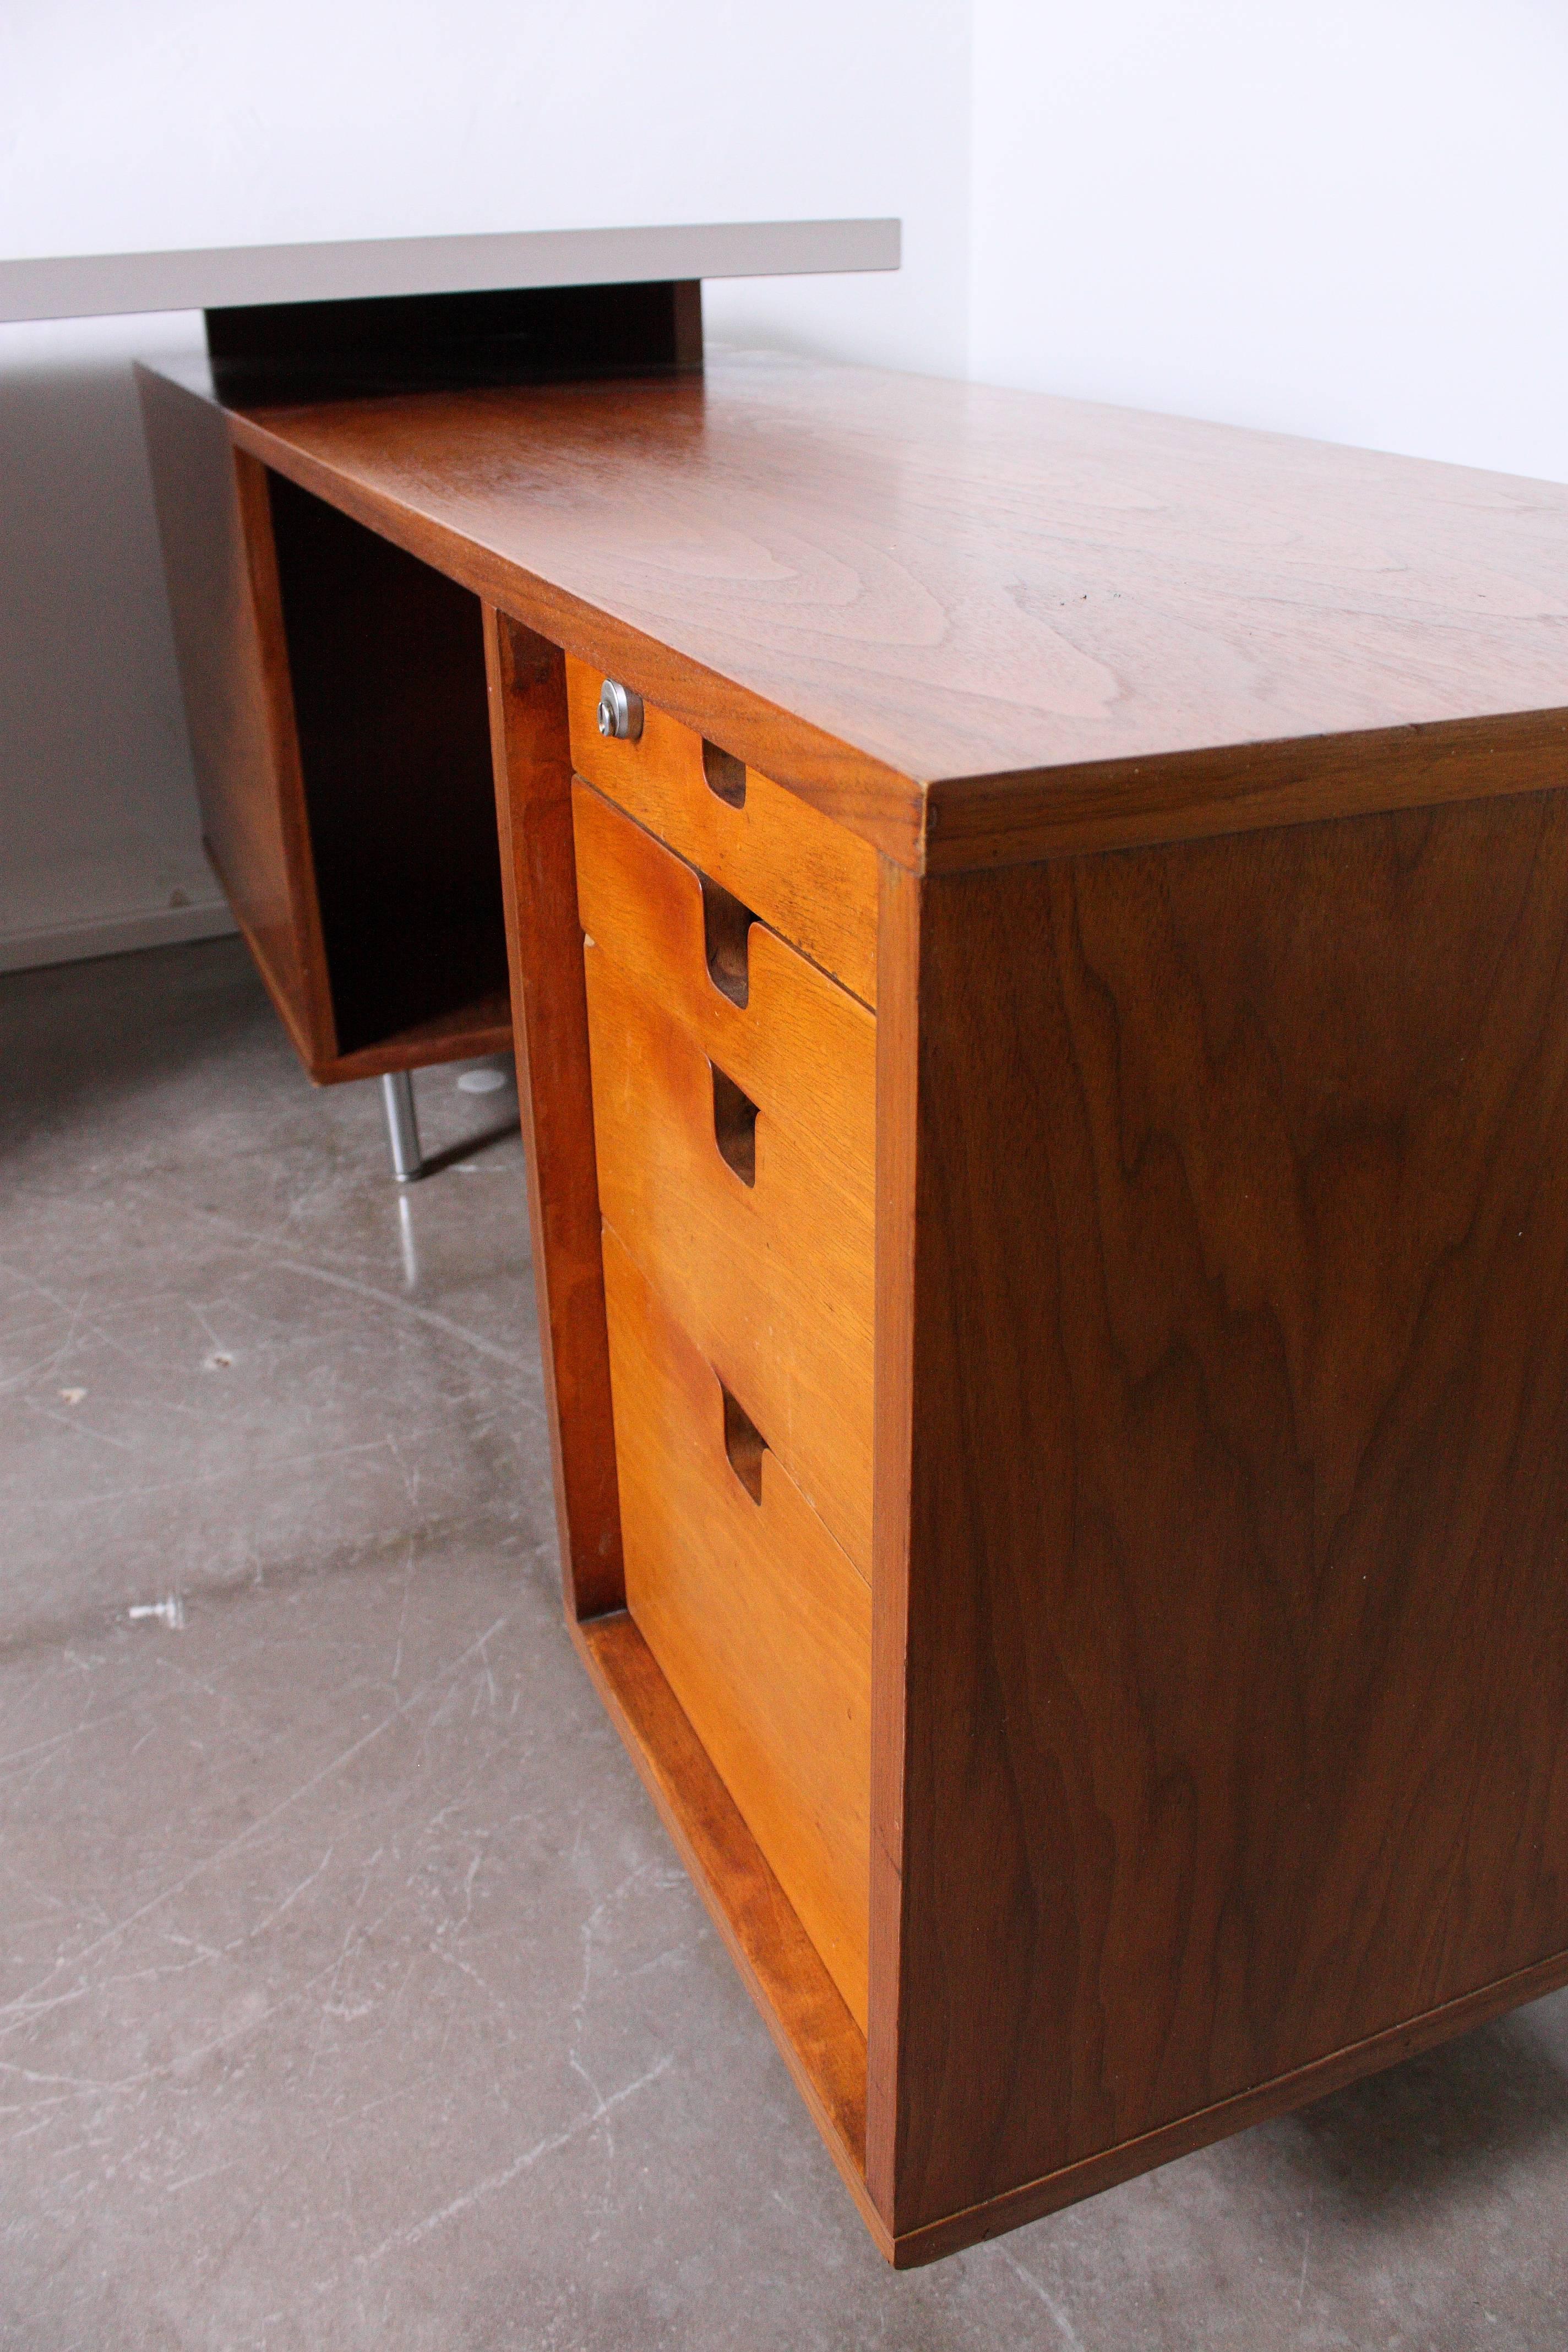 20th Century George Nelson Desk for Herman Miller with Open Credenza Return